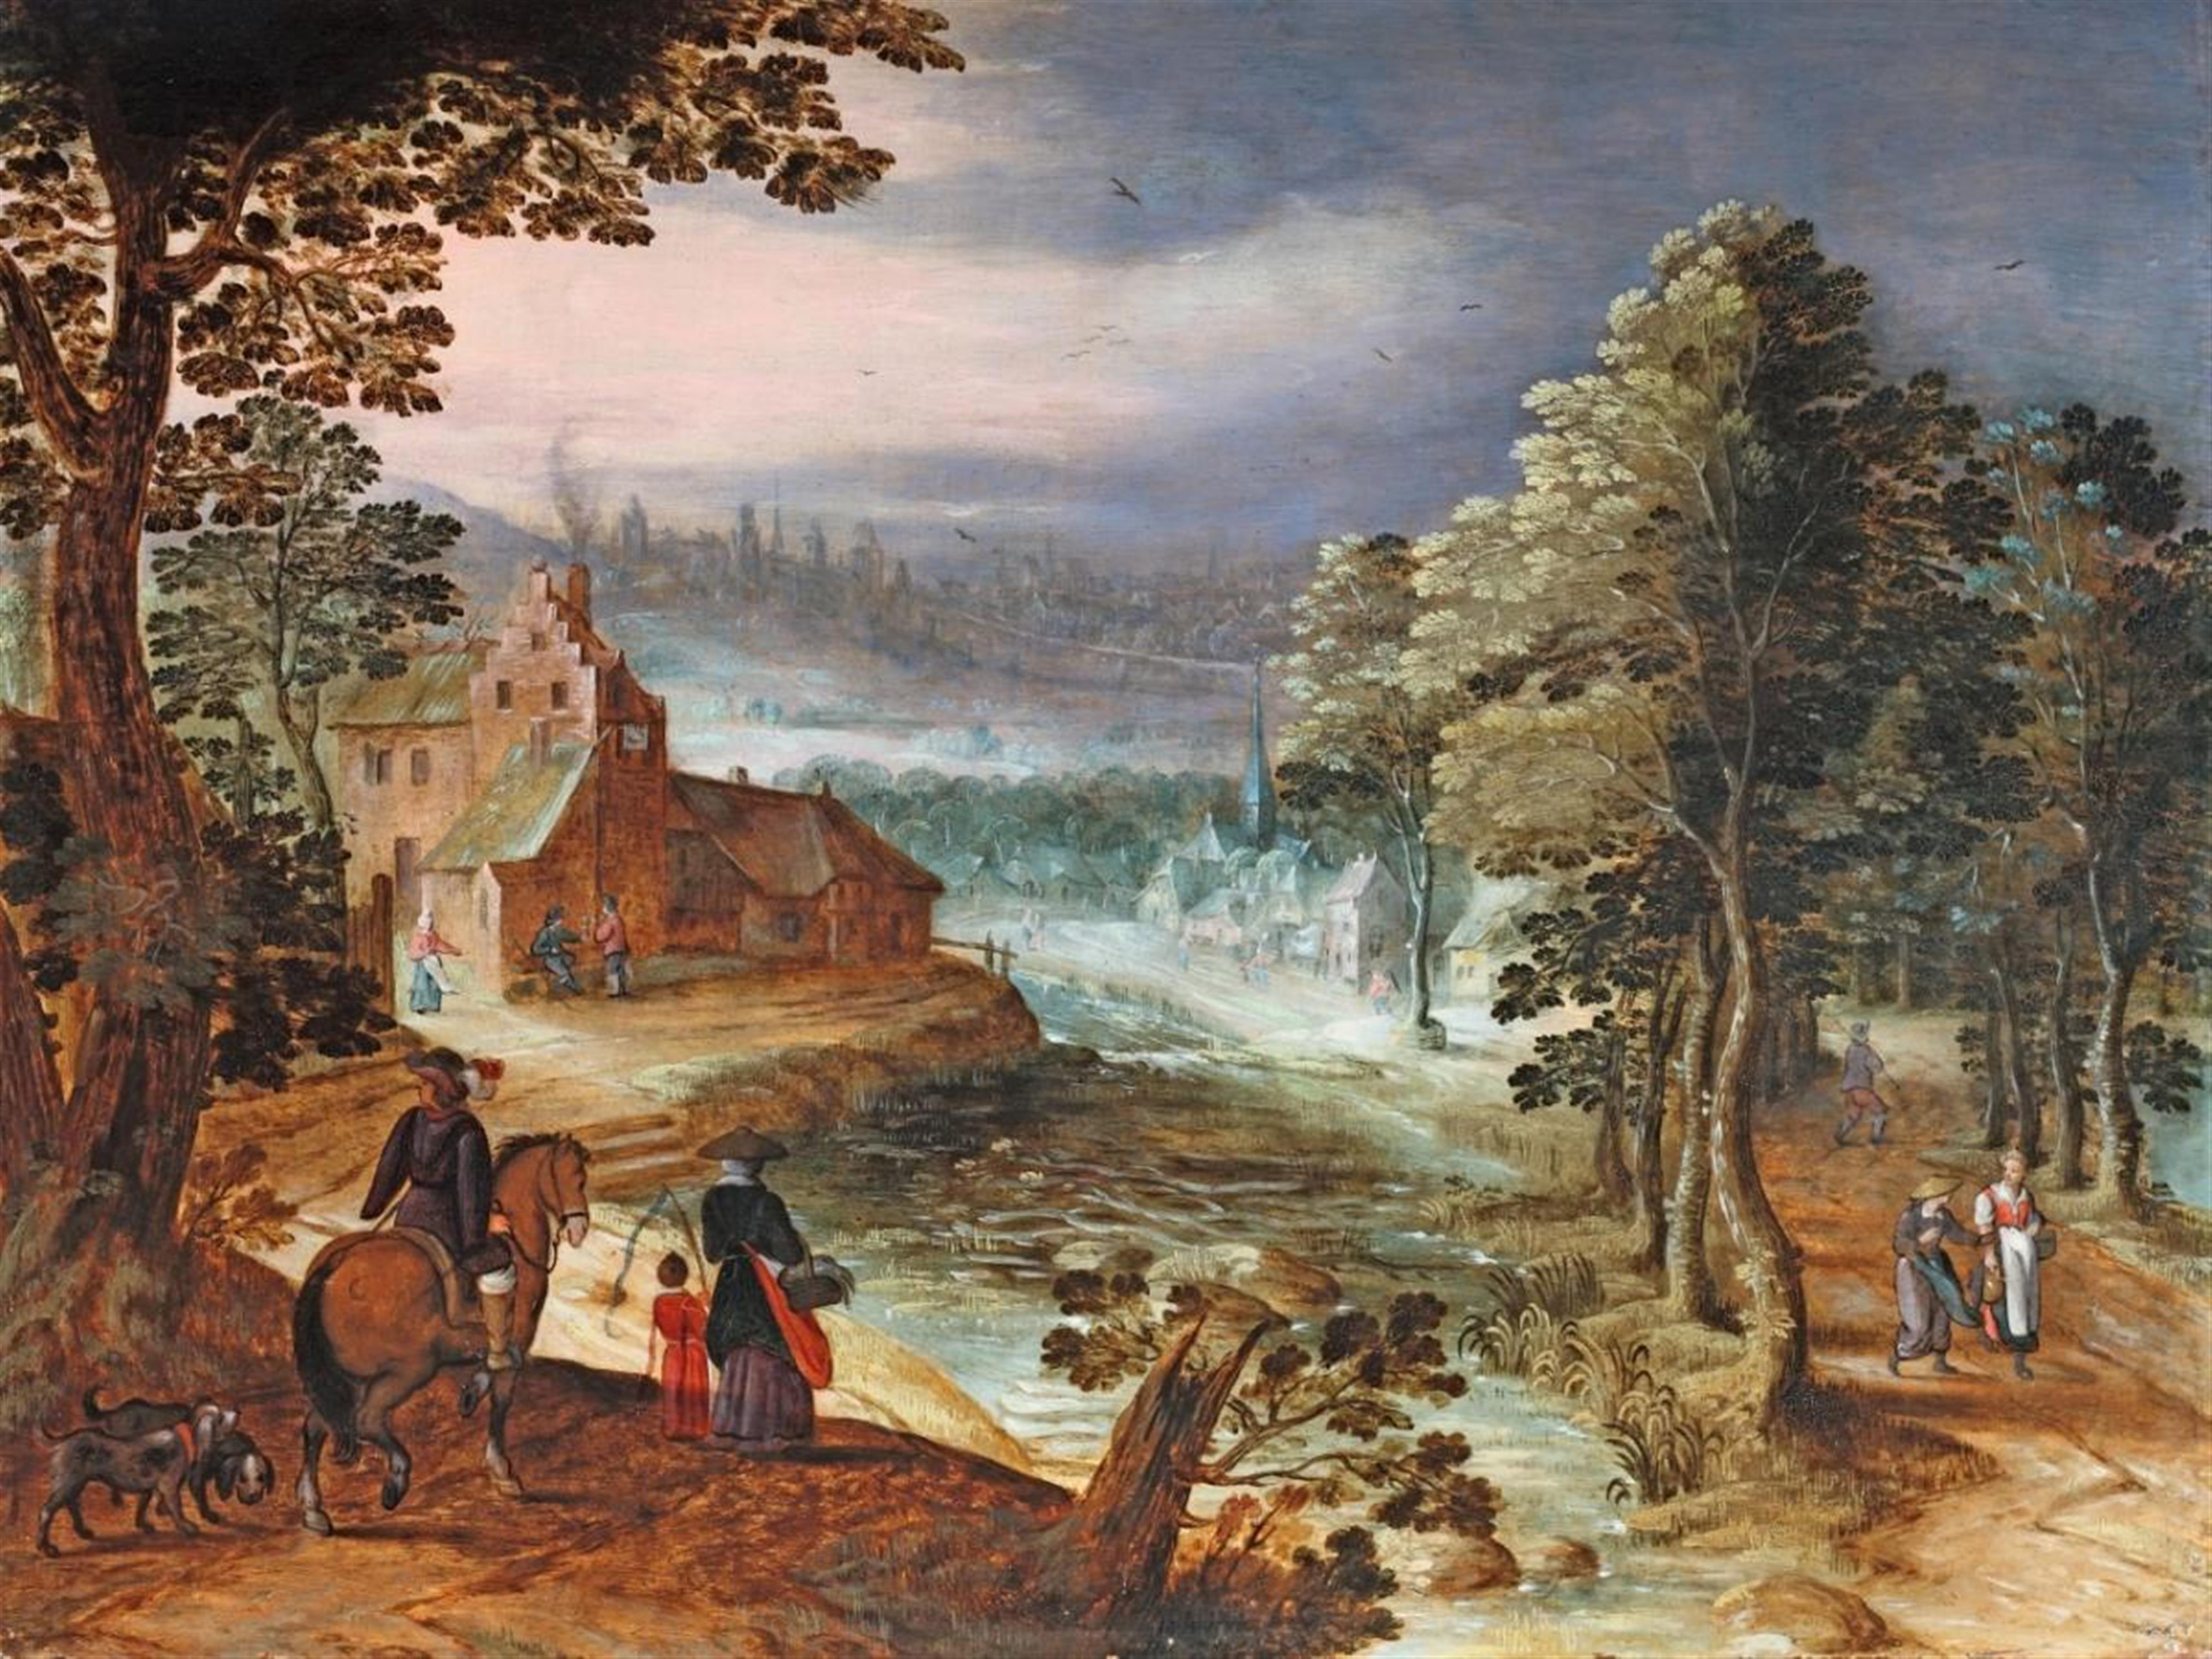 Tobias Verhaecht - HILLY LANDSCAPE WITH A VIEW ON A DISTAND TOWN - image-1